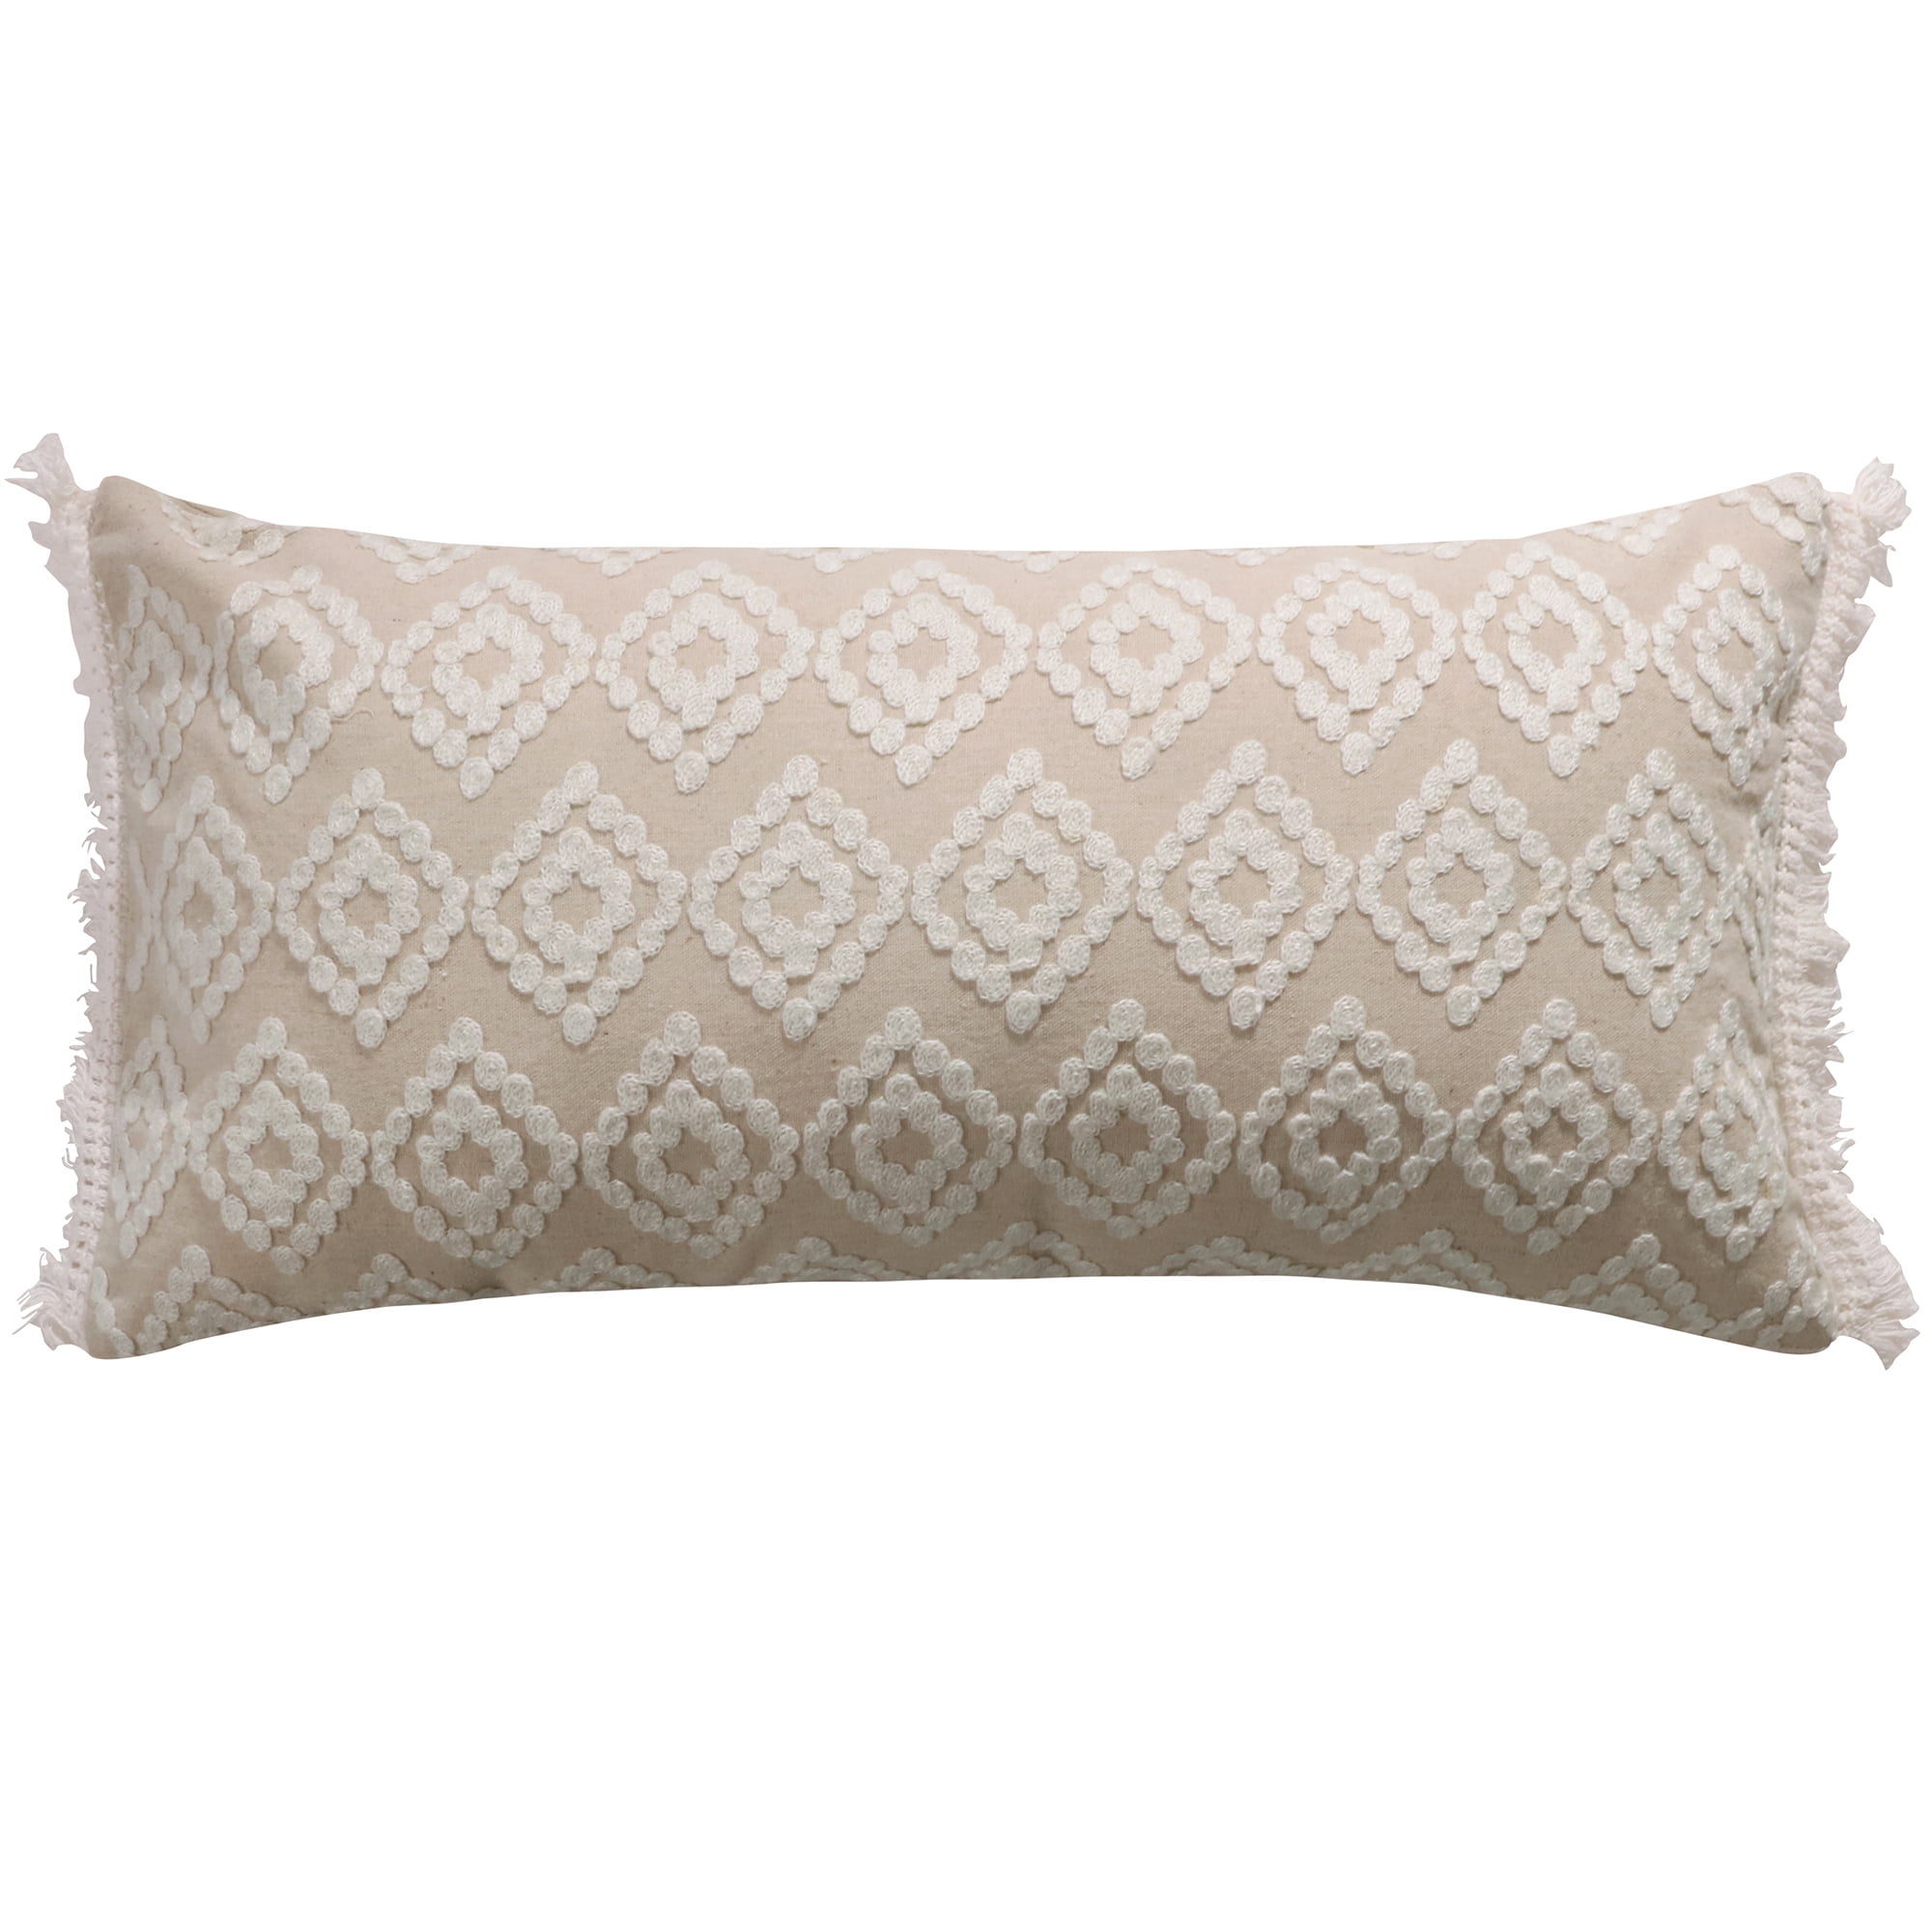 Levtex Home - Addie - Decorative Pillow (12 x 24in.) - Embroidered ...